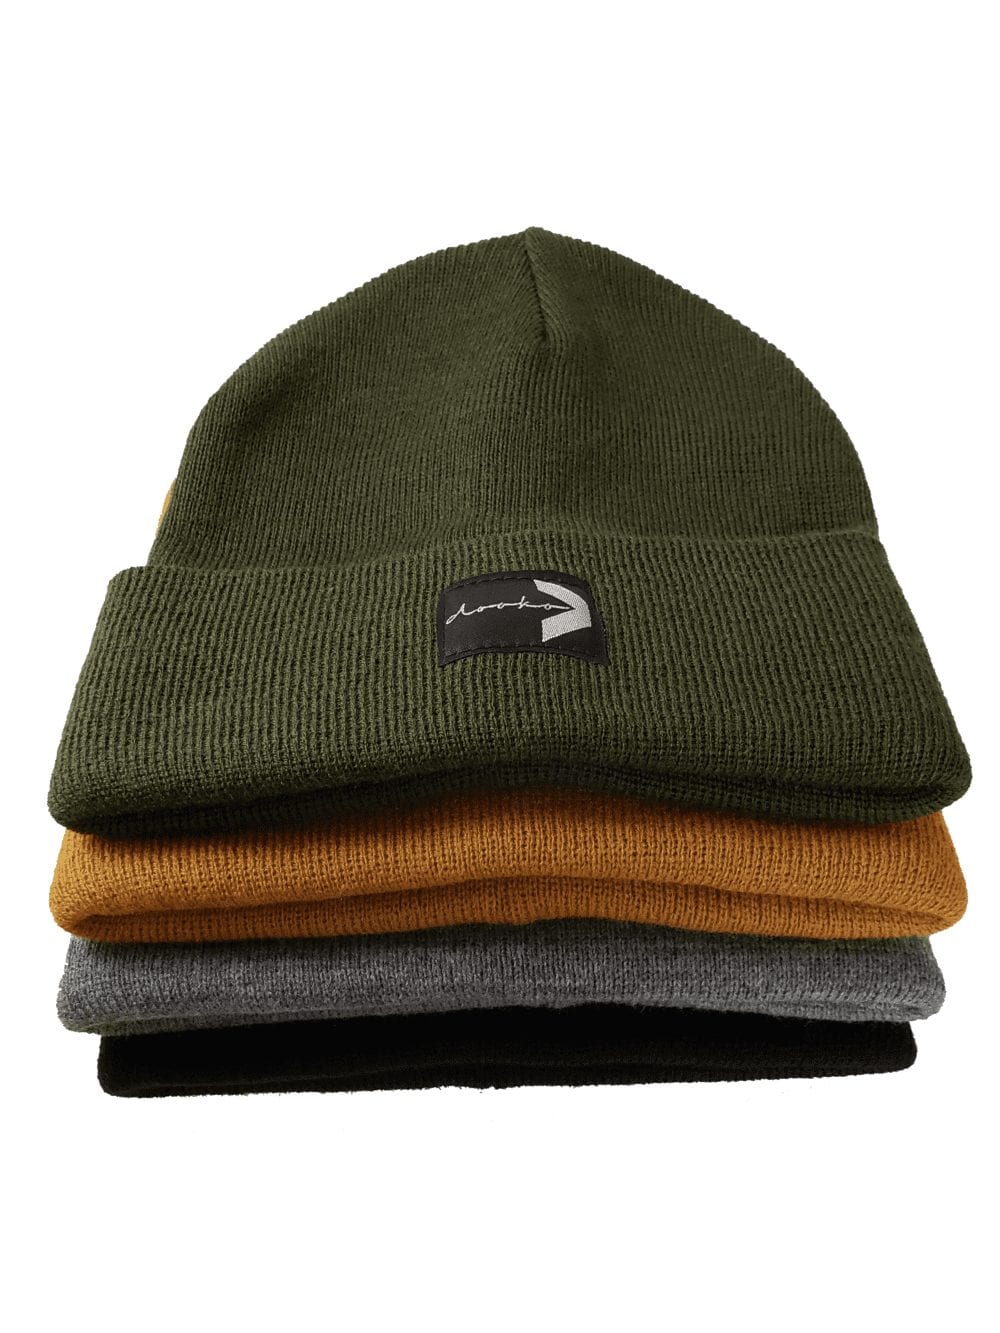 stack of different colored beanies